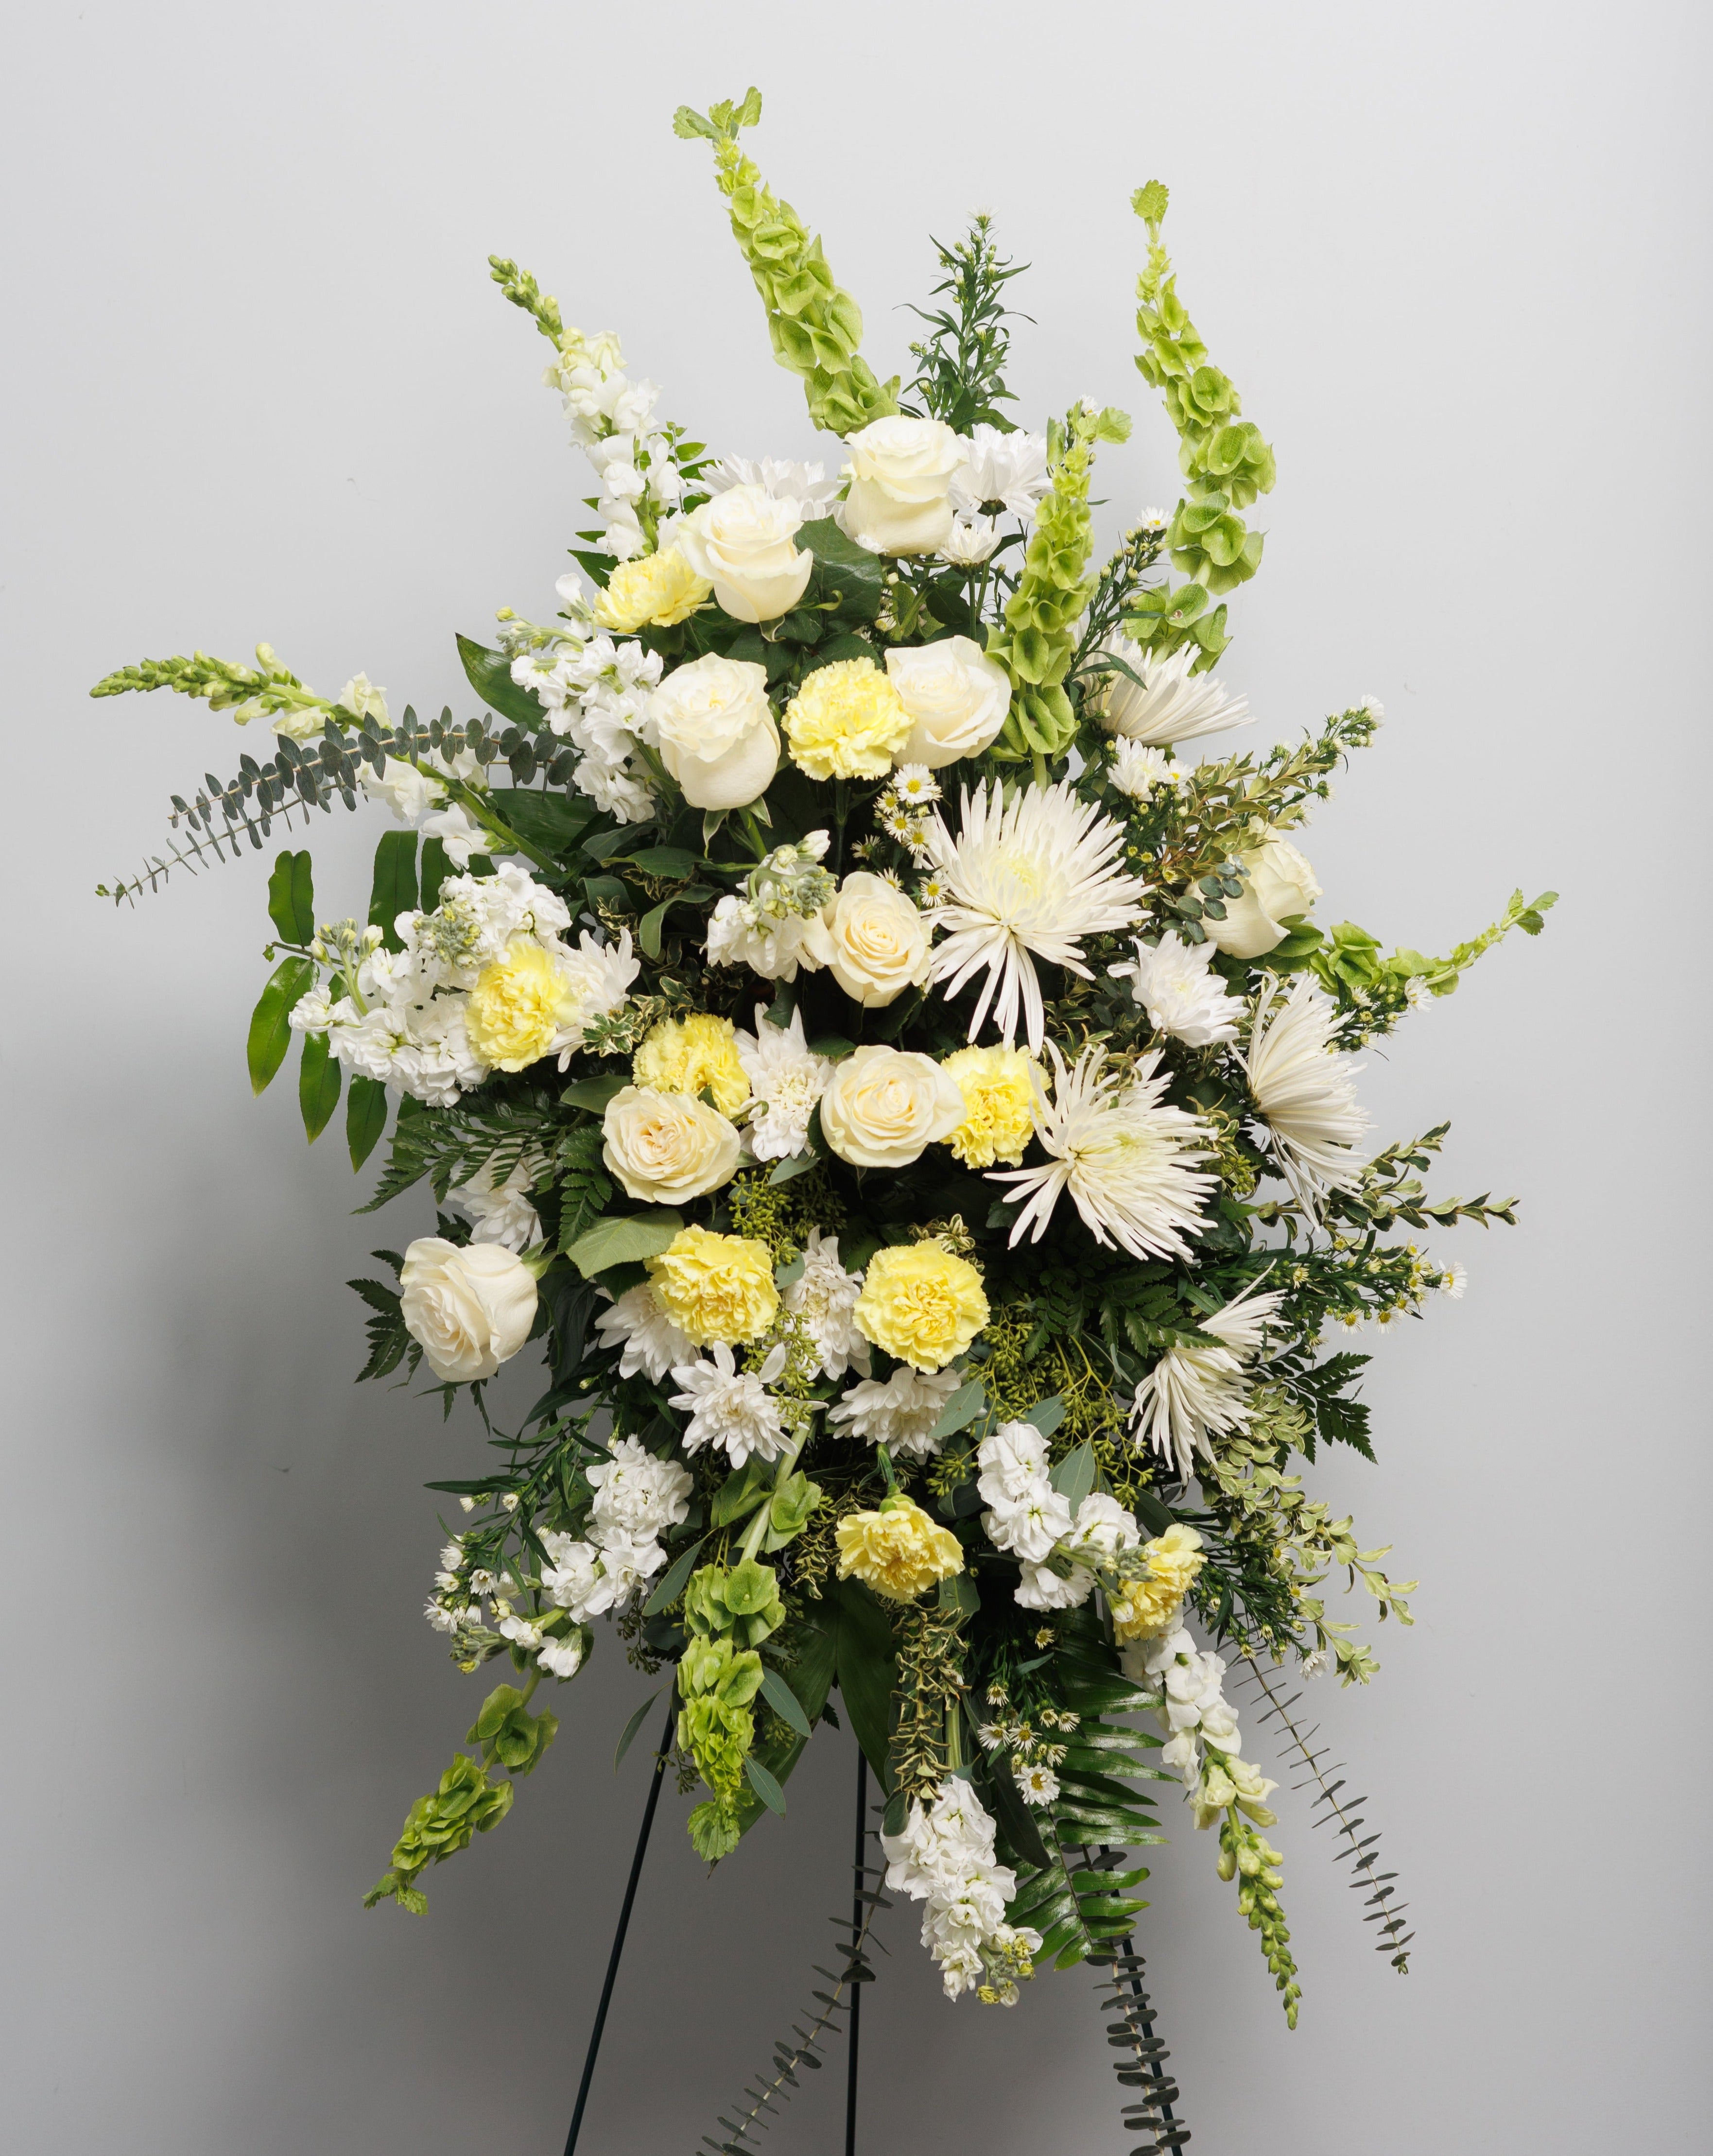 A standing spray with white, yellow and green flowers.